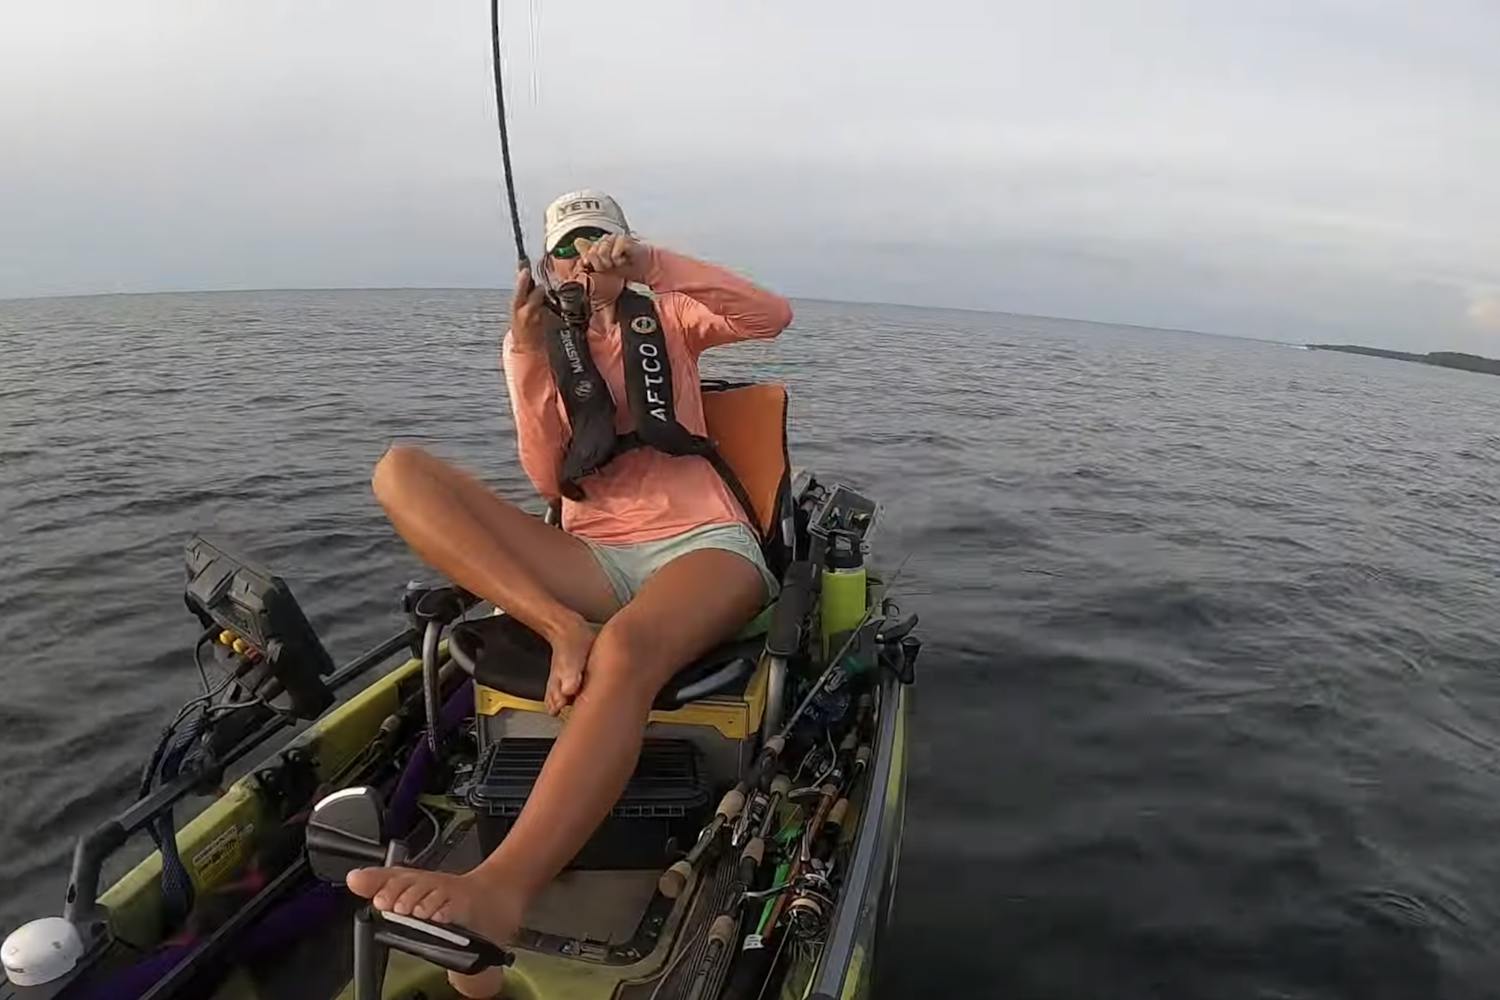 Big Mille Lacs Bass on Small Hair Jigs